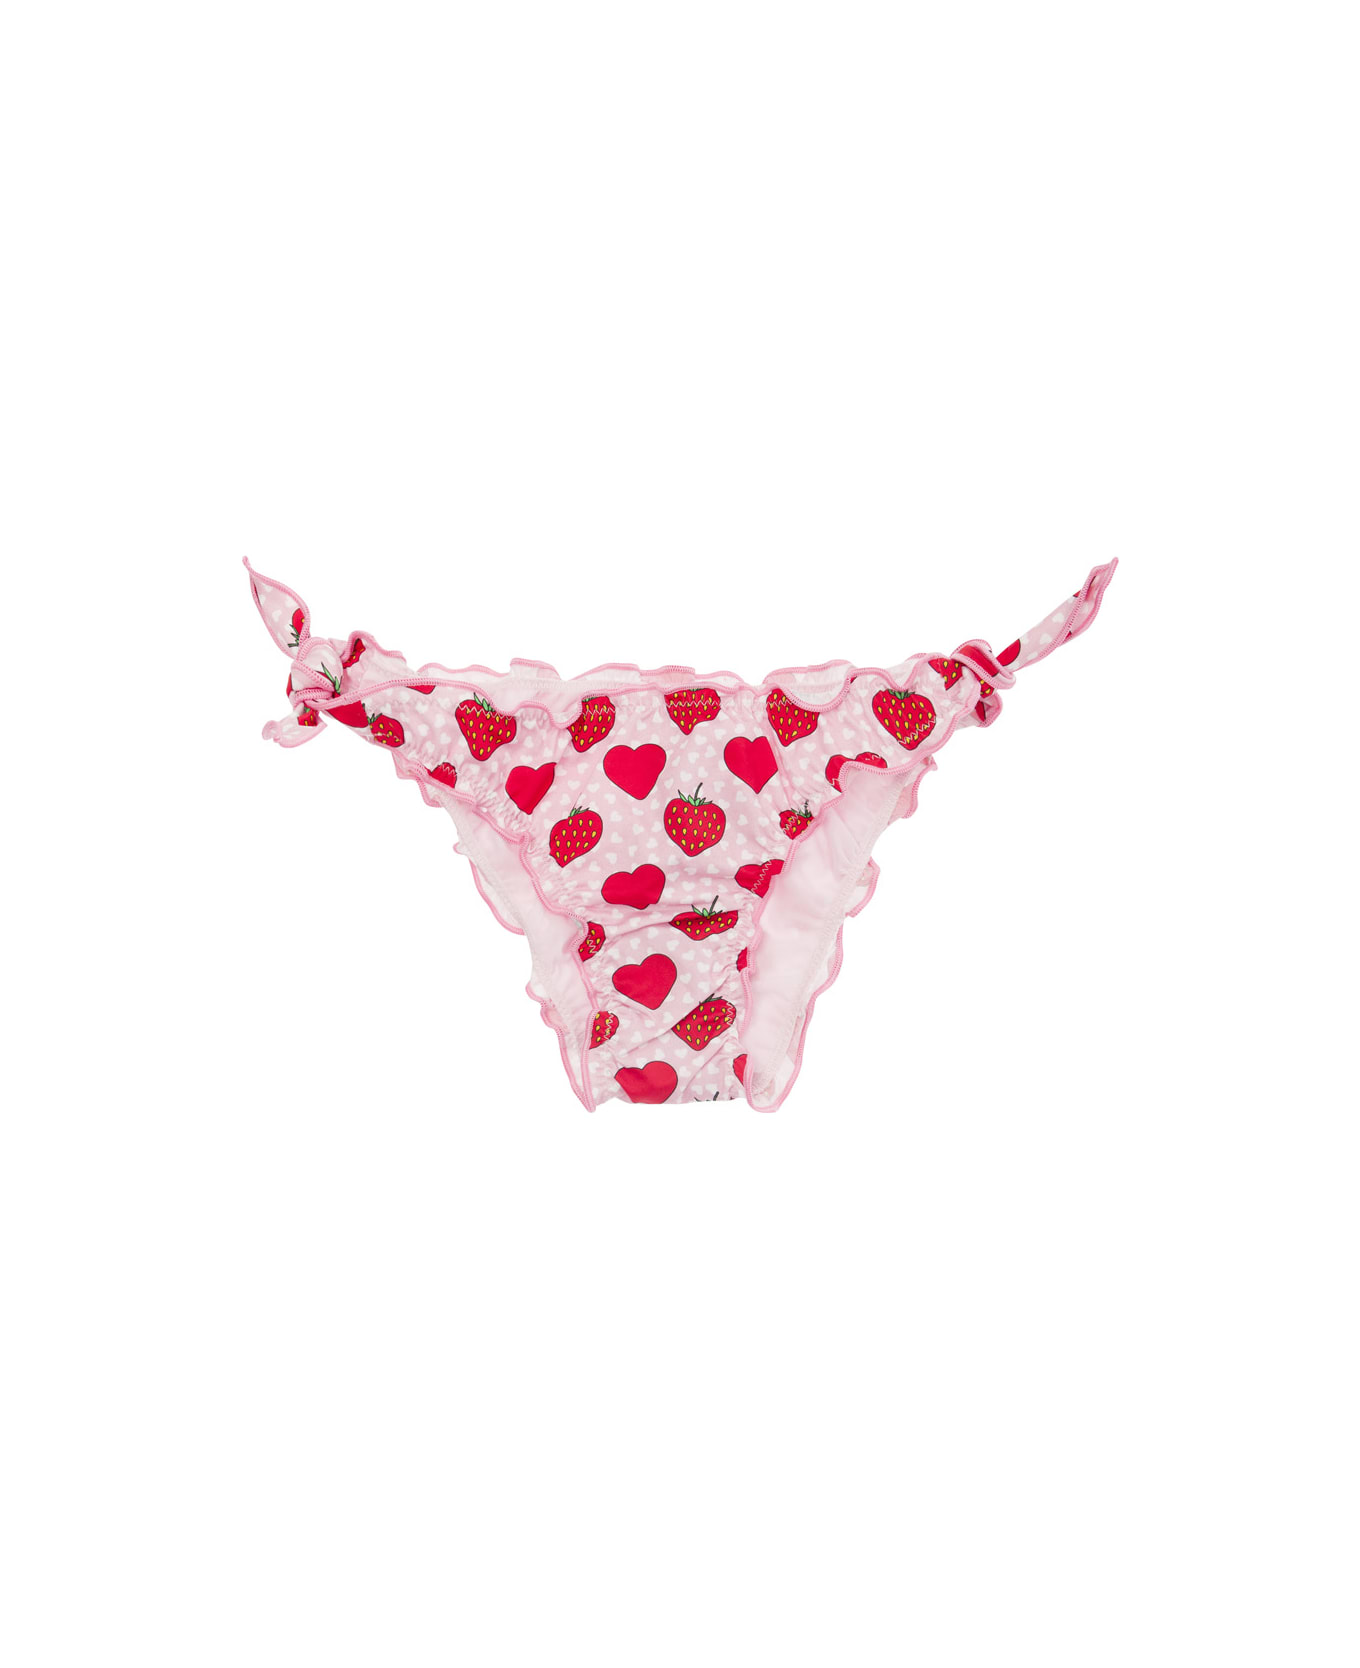 MC2 Saint Barth Pink And Red Bikini Bottom With Strawberry Print In Stretch Fabric Girl - Multicolor